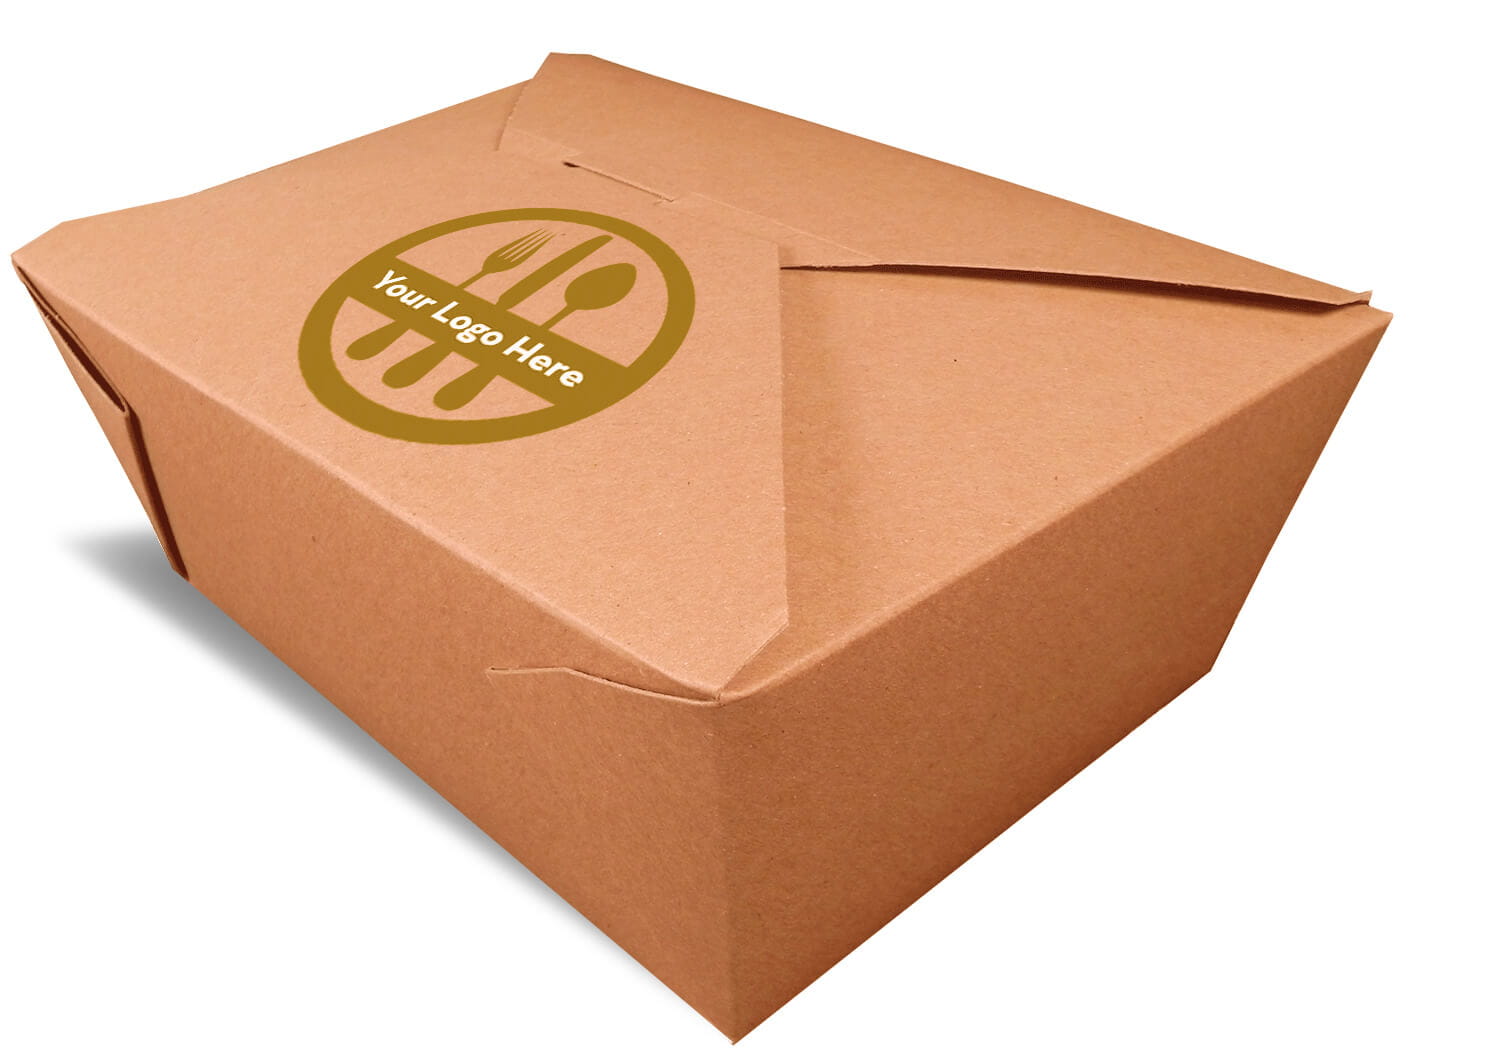 A brown rendering of a closed Bio-Plus earth folding carton container with a printed logo.